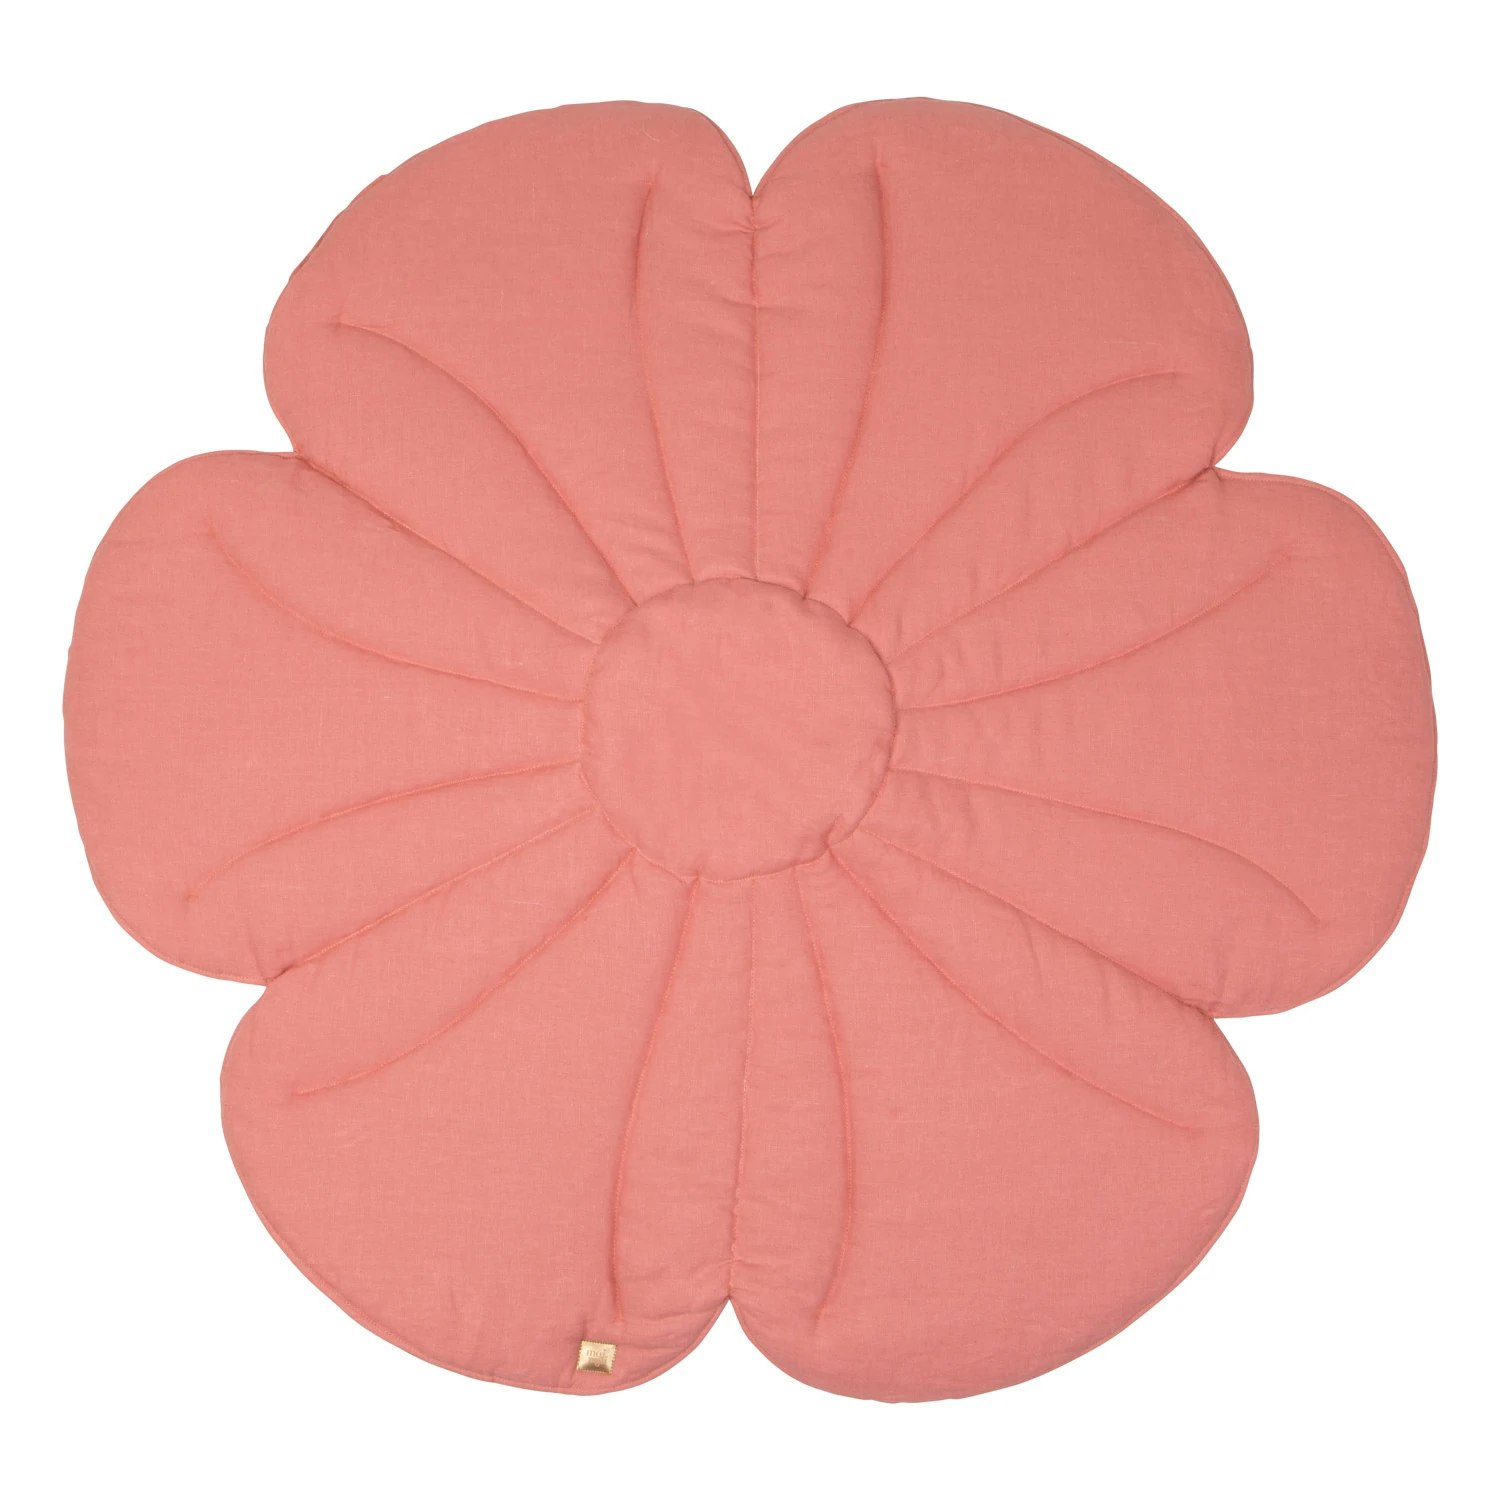 Moi Mili, linen play mat, Bloom Coral Pink 